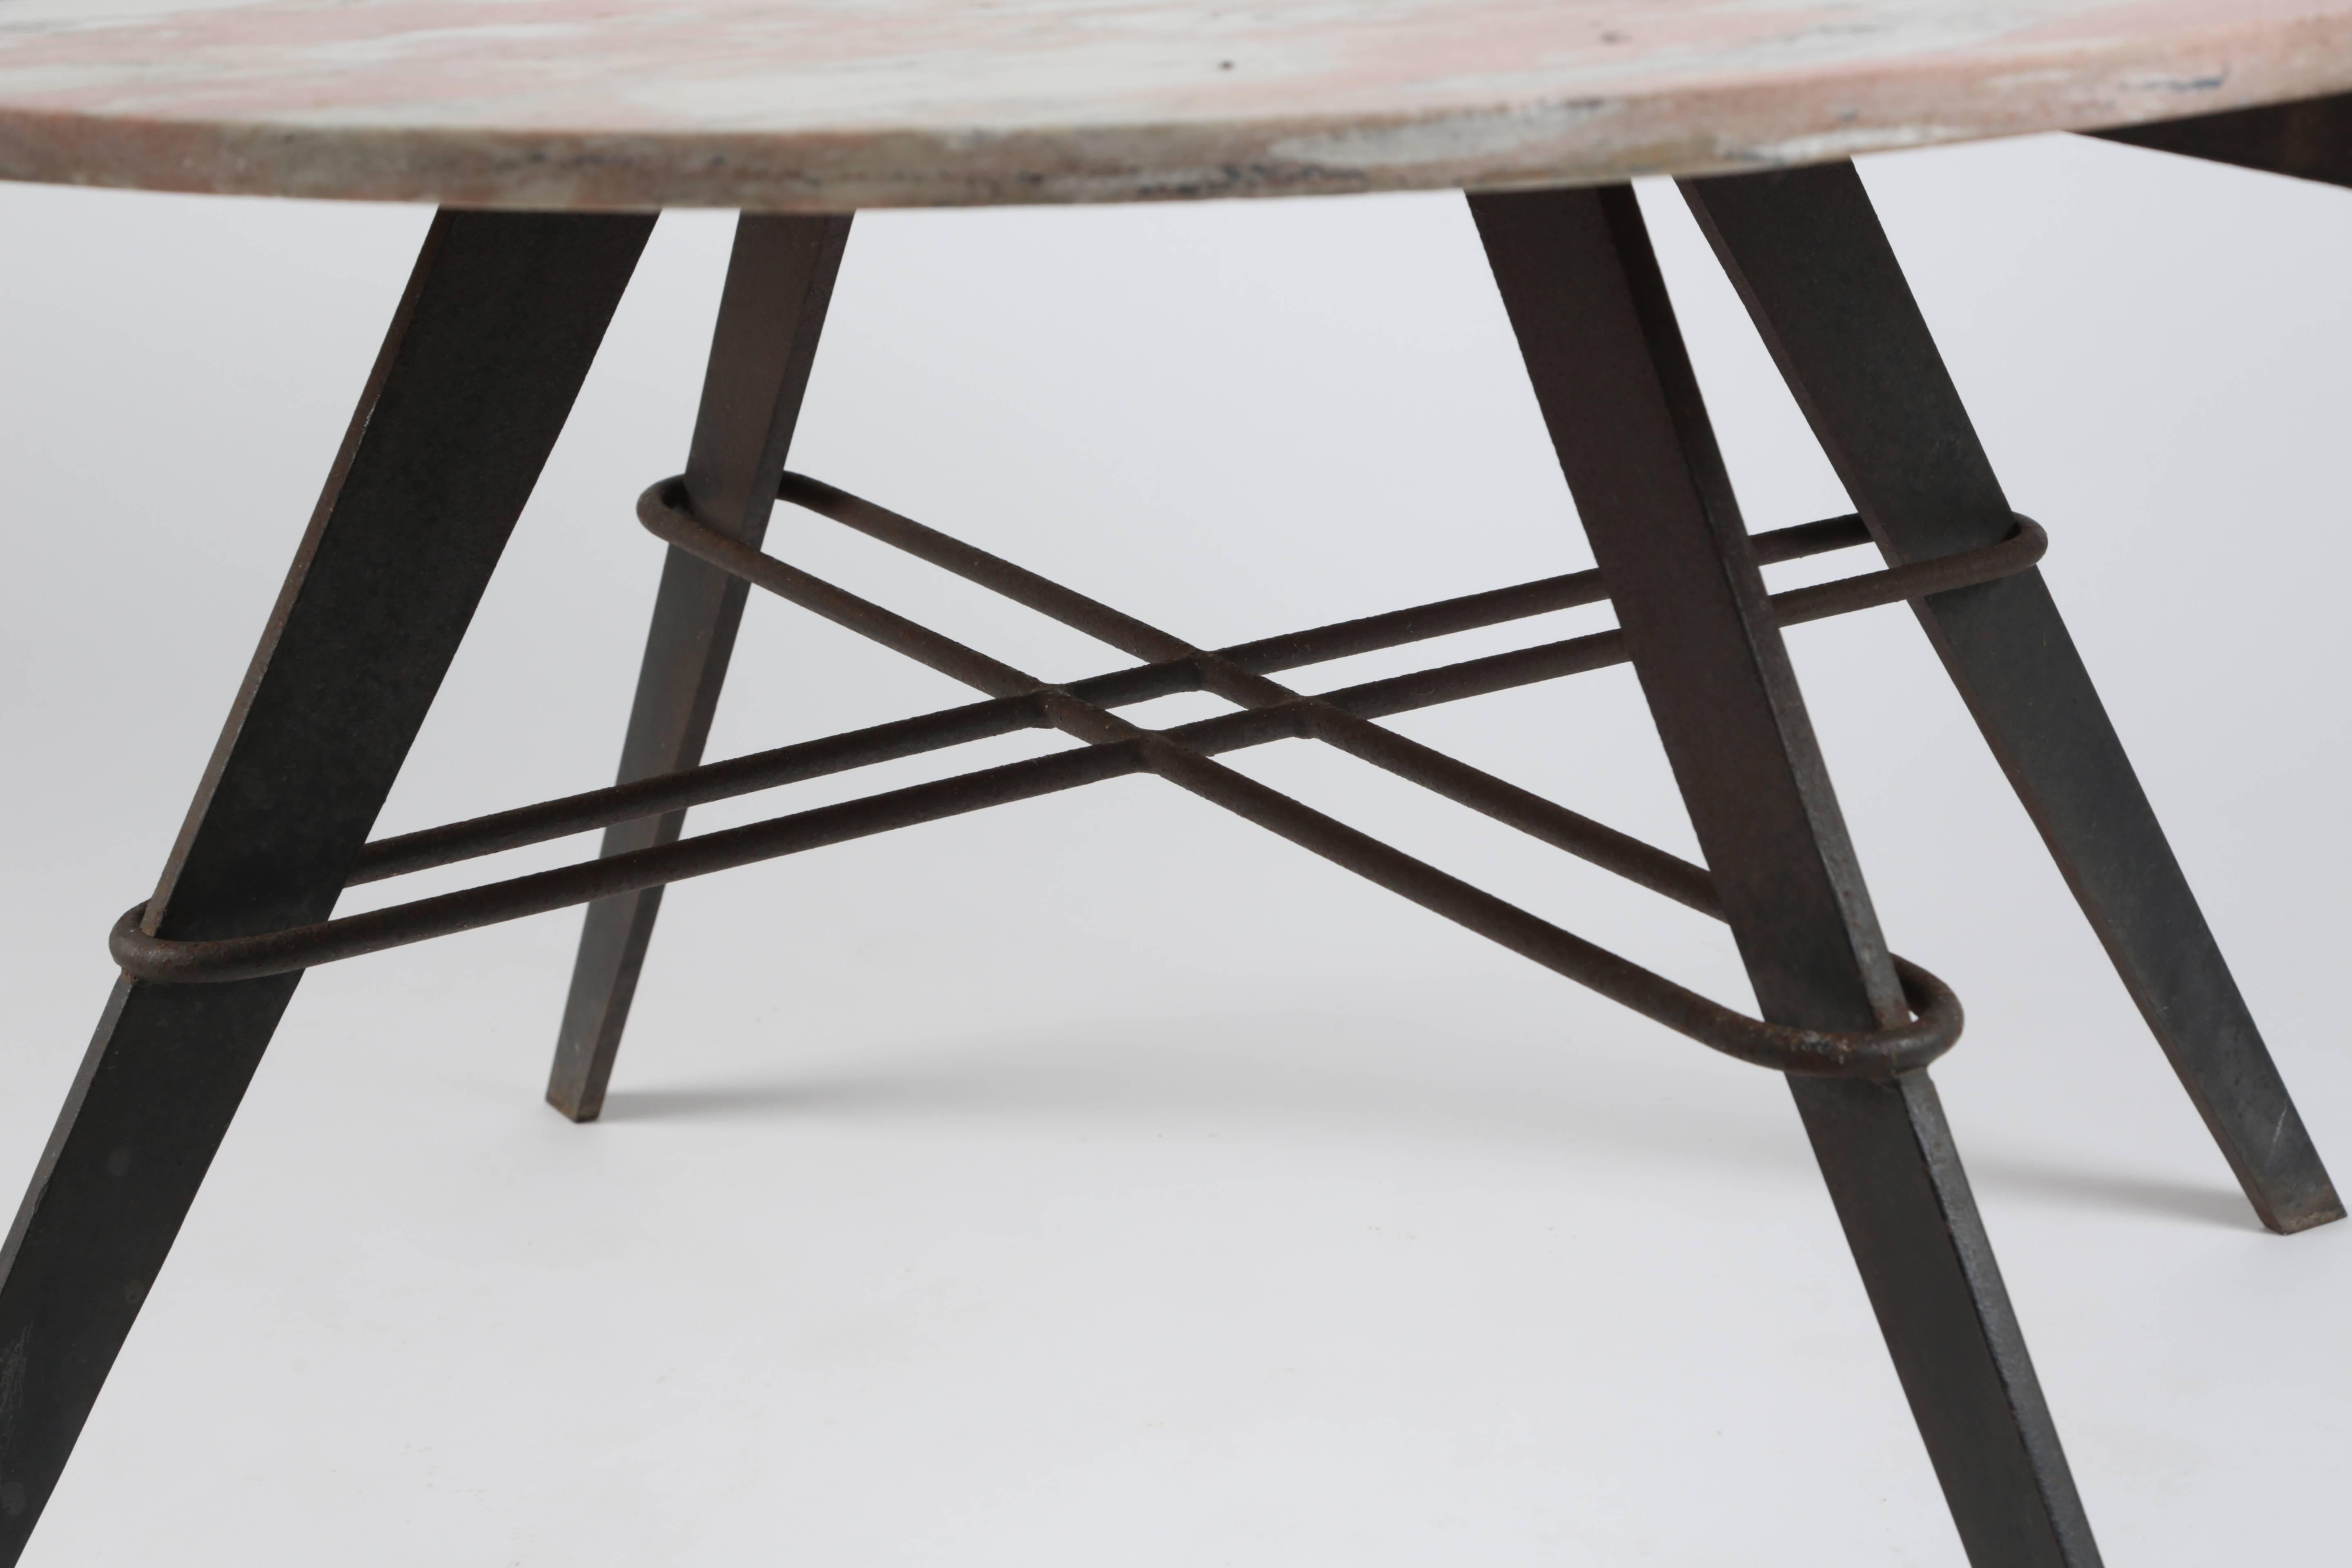 A fantastic iron and marble-top table by legendary Hollywood decorator and designer William 